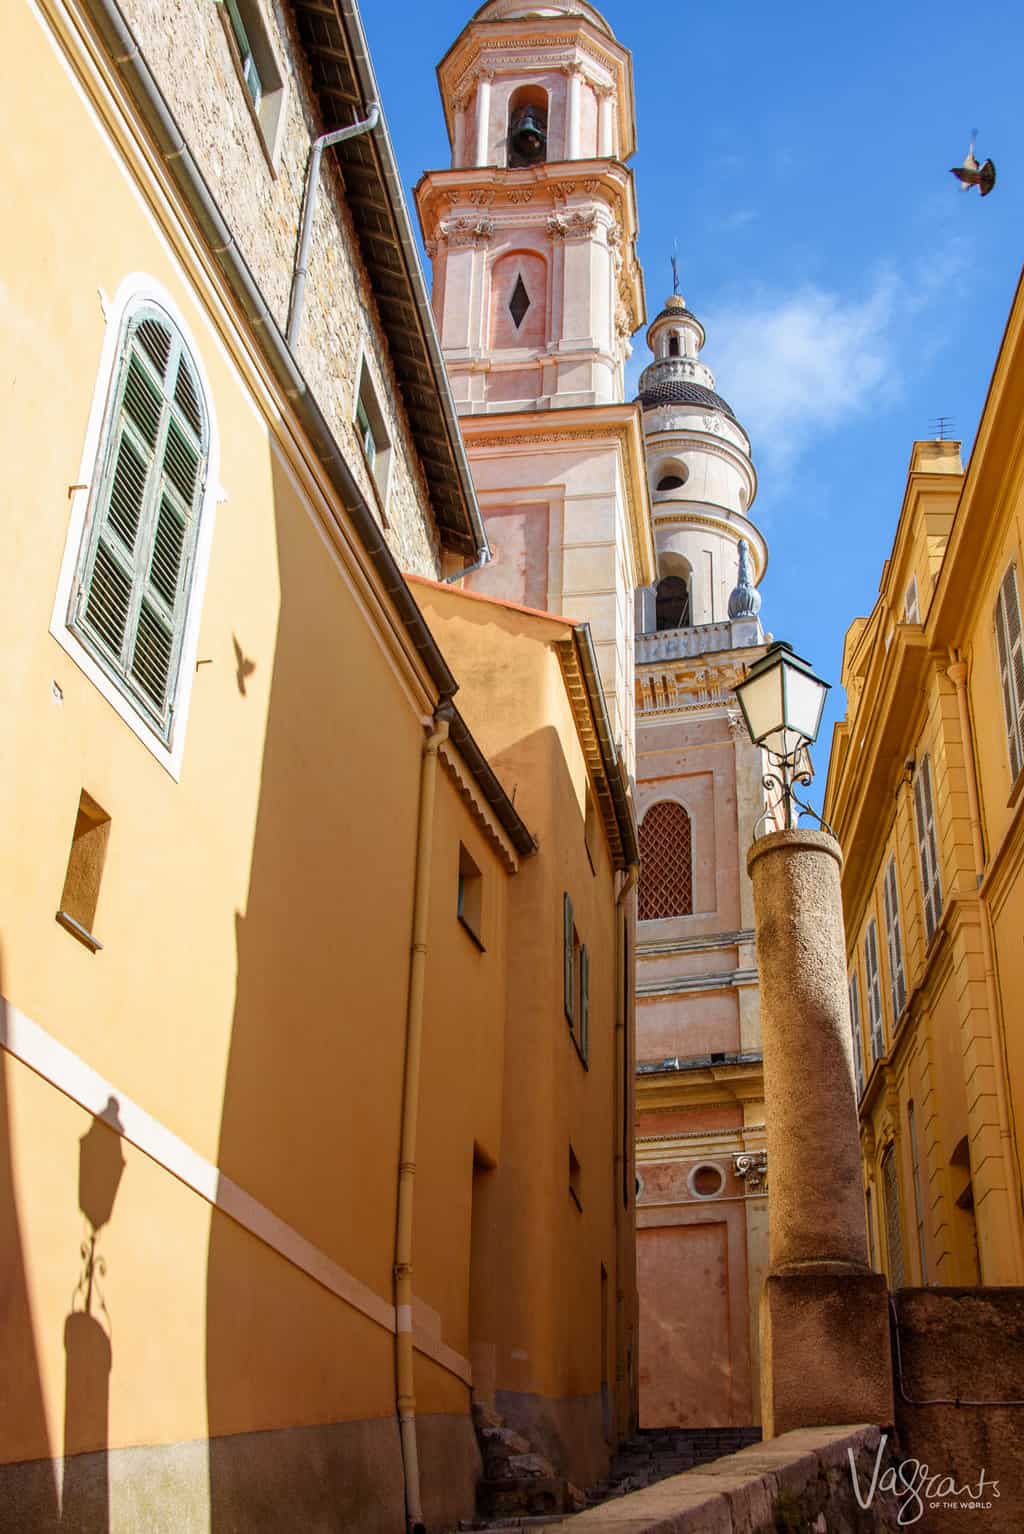 Looking down a narrow streets with neo classical buildings in hues of yellow and pink to the bell towers of a church. 